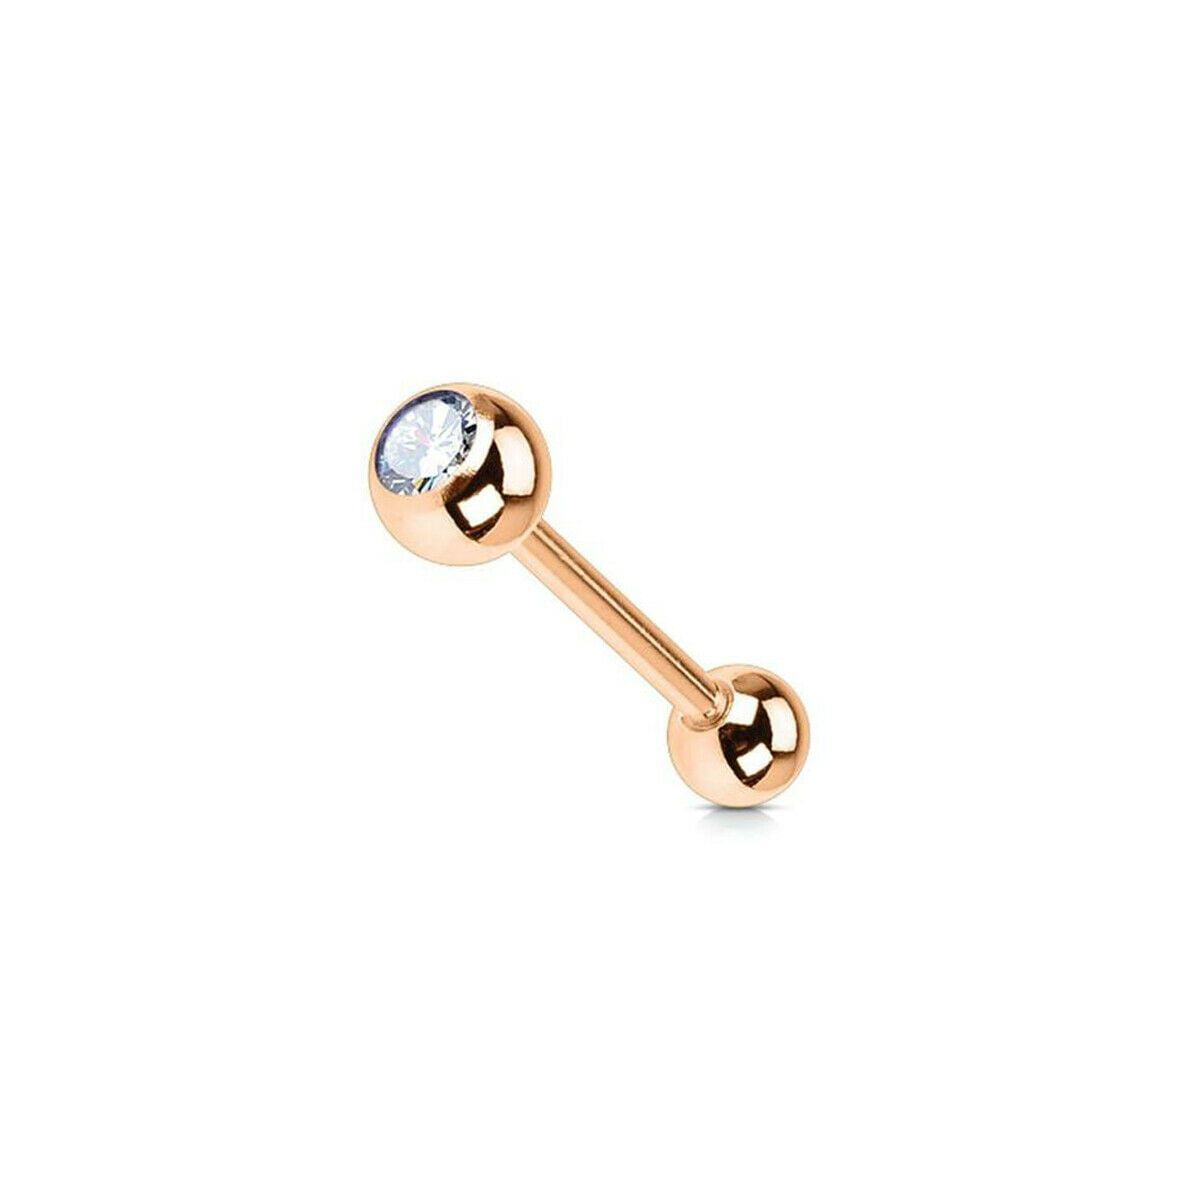 Gold Tongue Ring Barbell With Gem Barbell Jewelry 14g 5/8" 